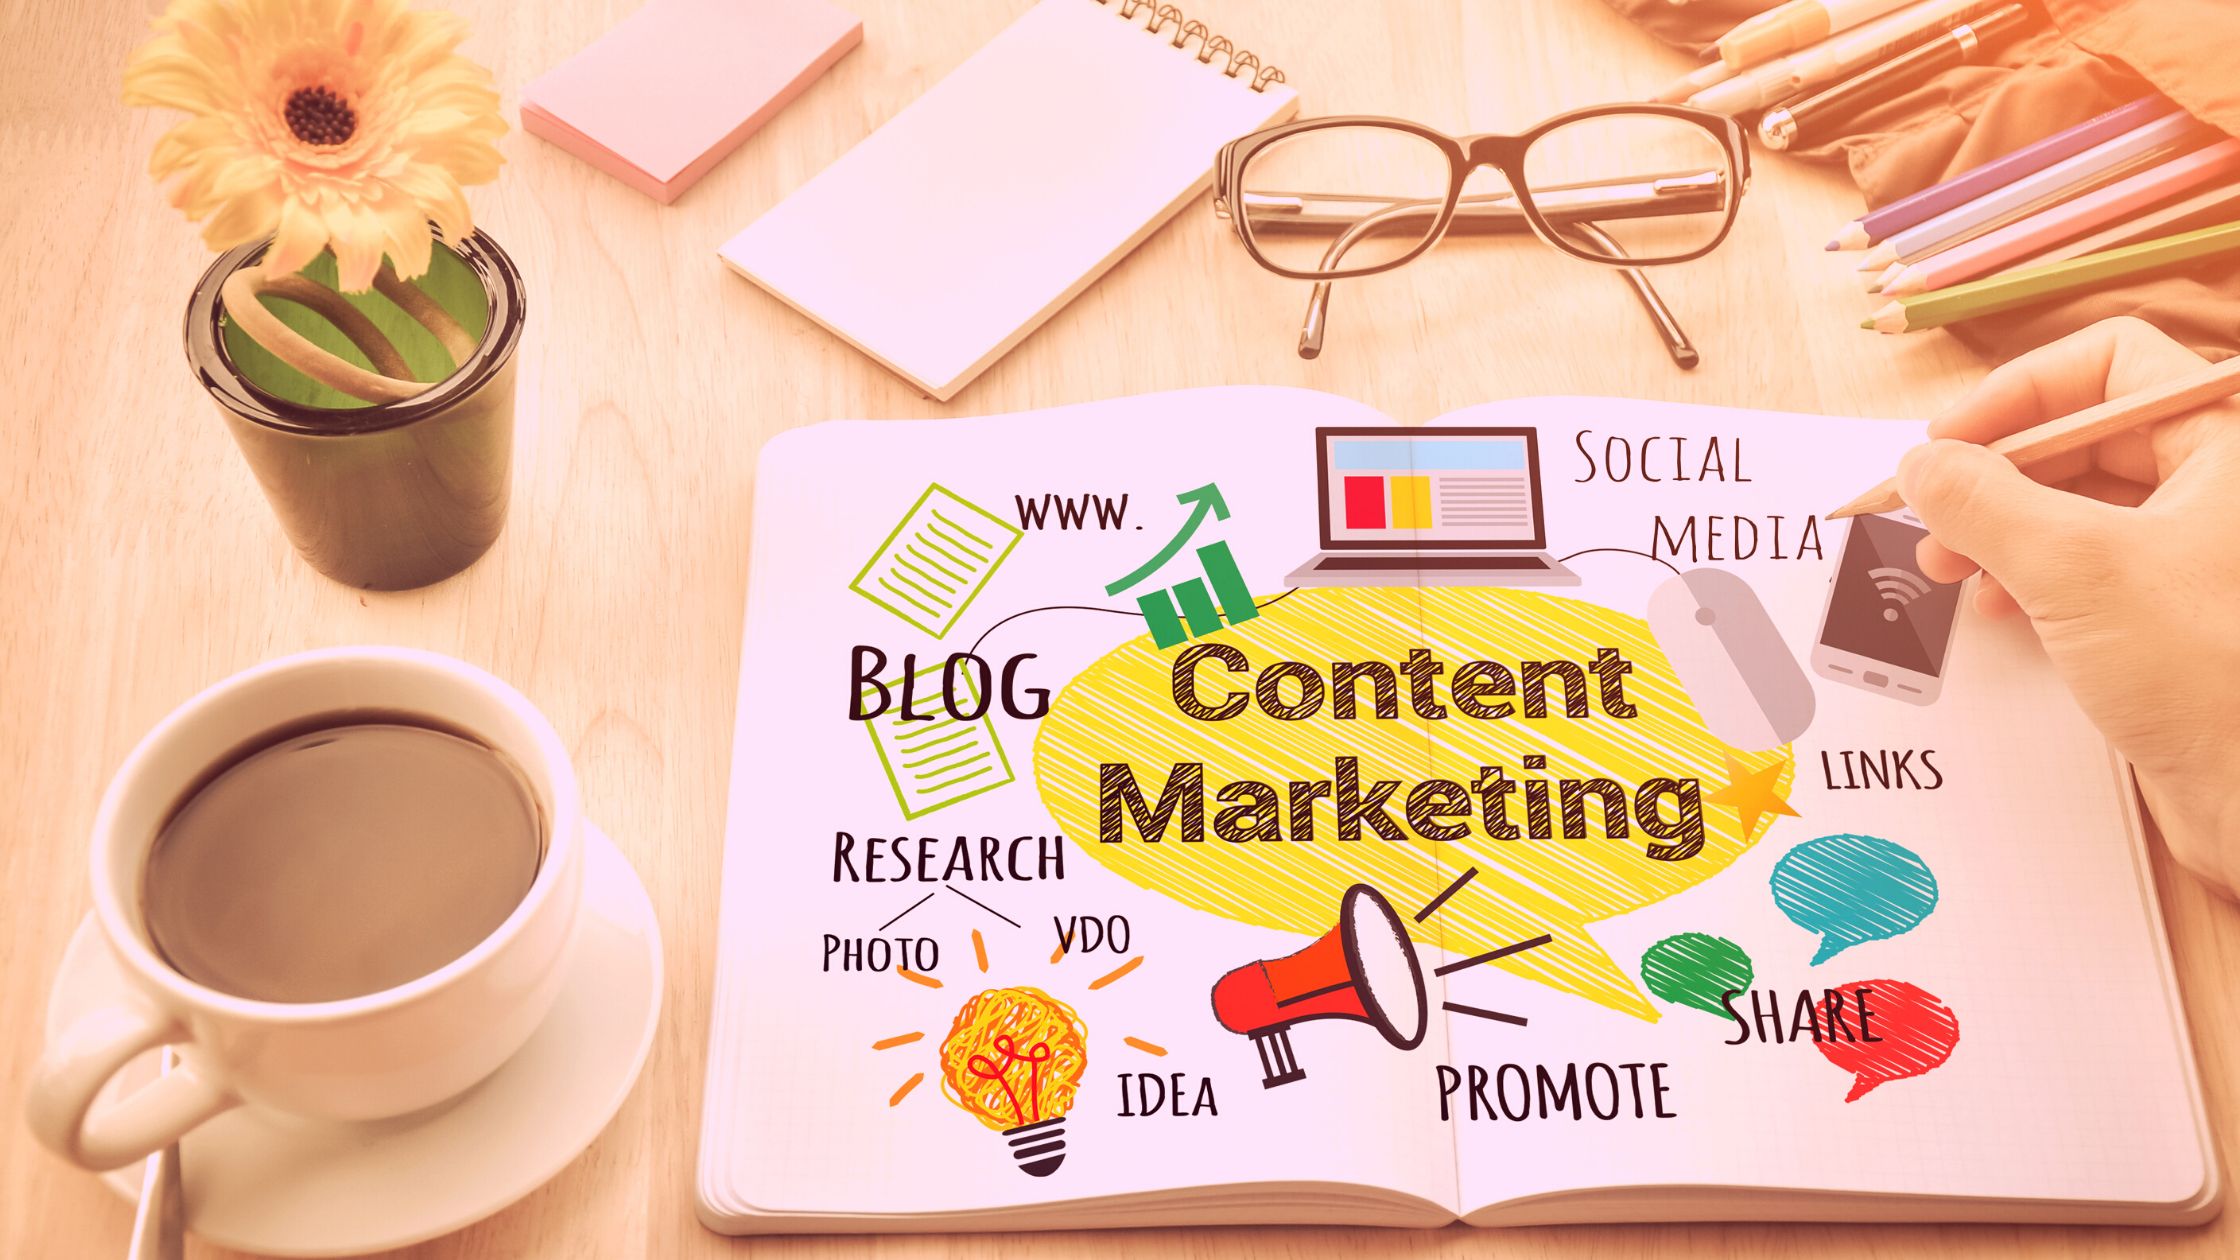 What Is Content Marketing and How Is It Used?